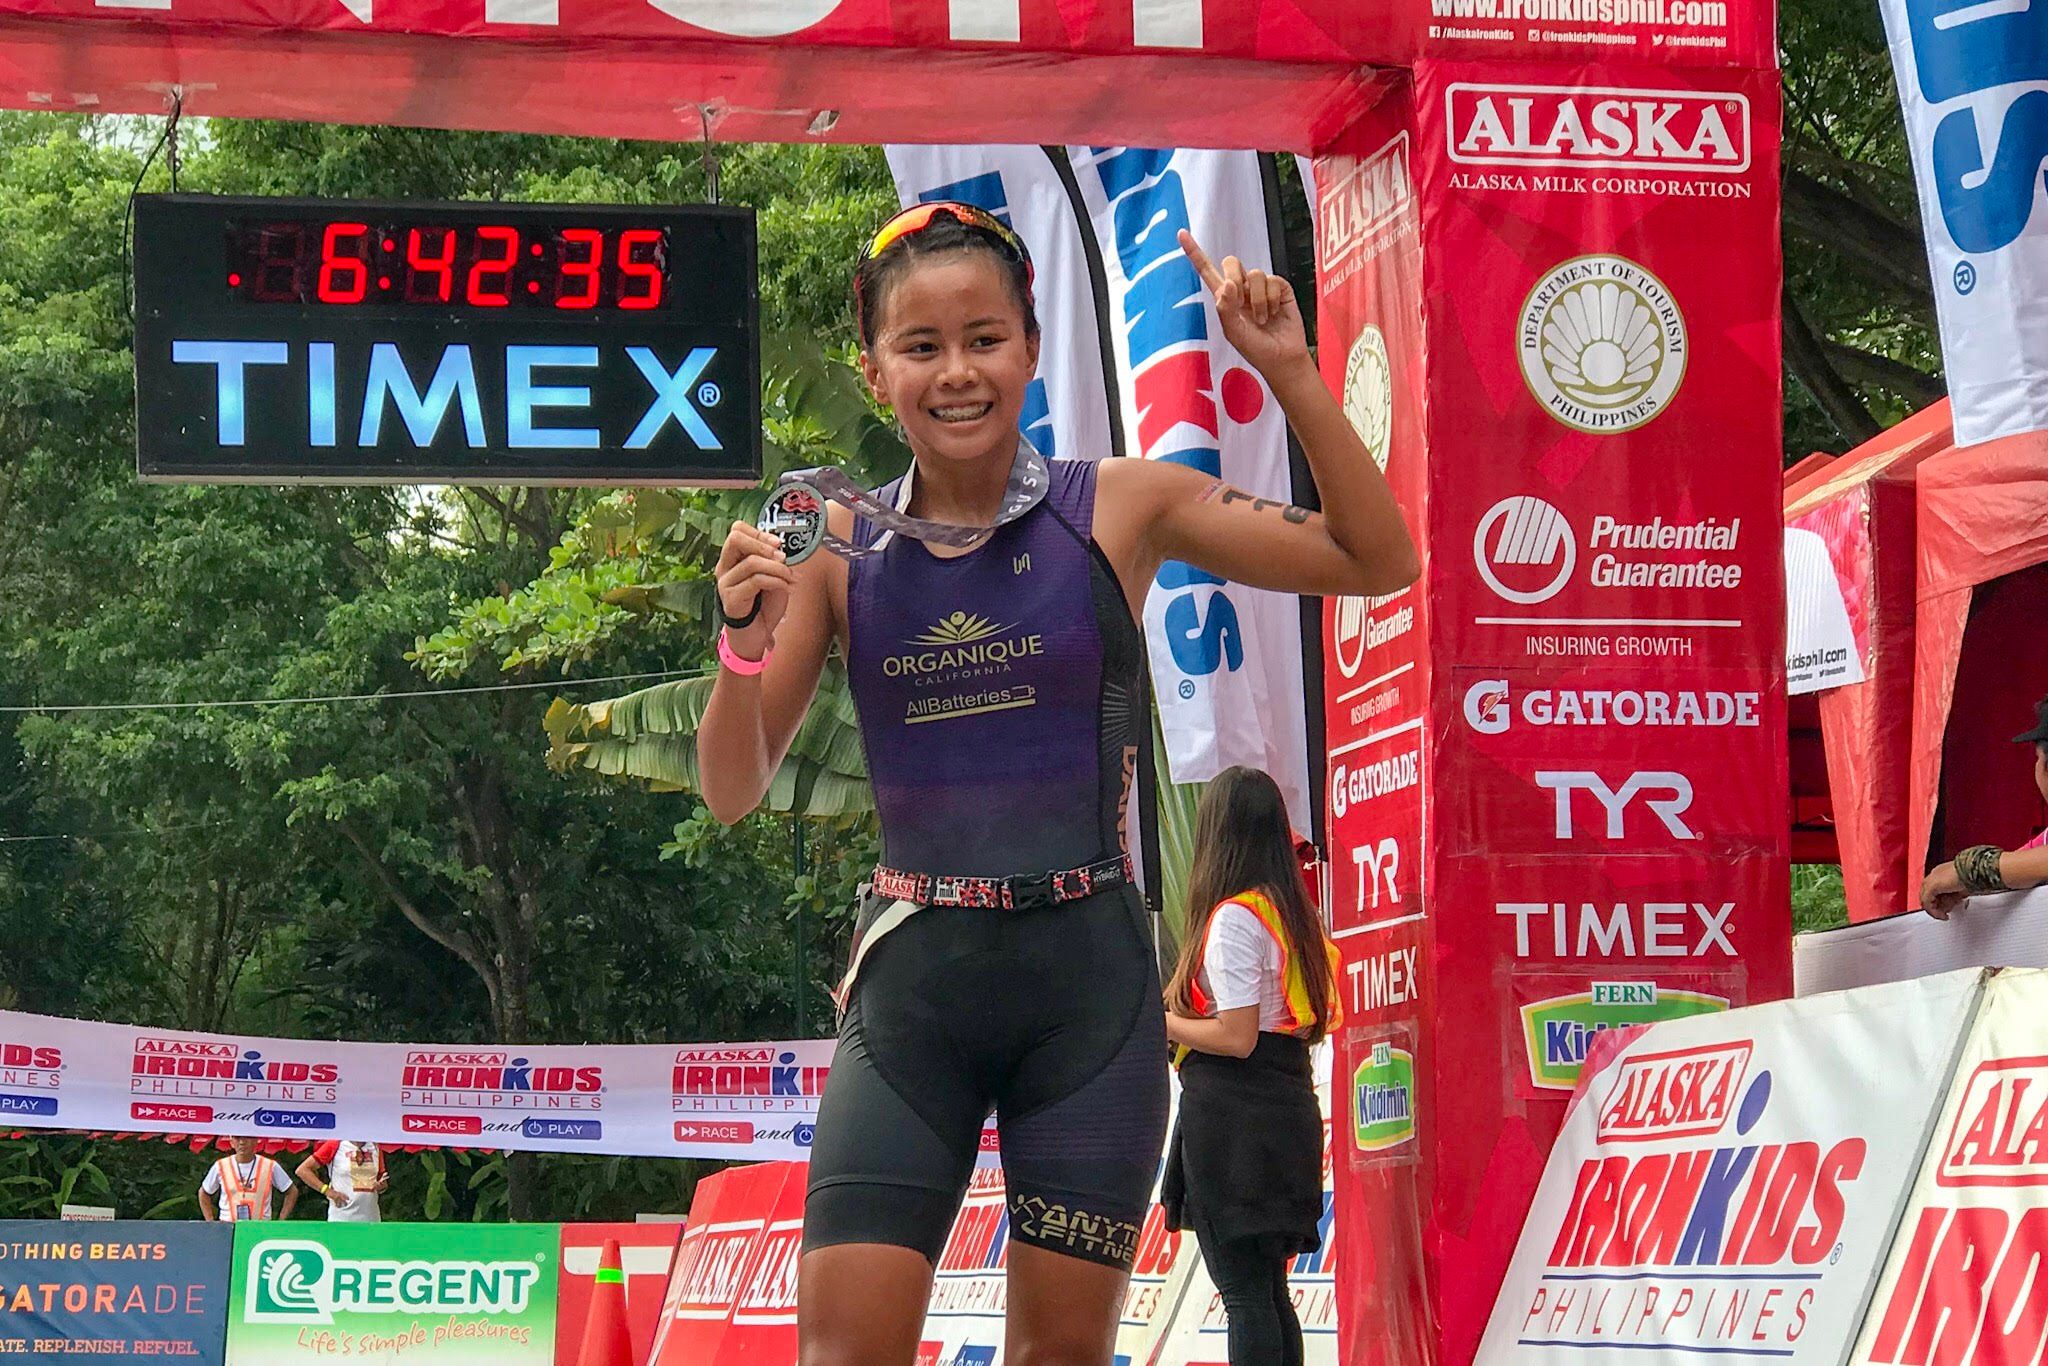 LEADER. Moira Erediano breaks away from the pack in the run leg to rule the 13-14 girls Ironkids. Photo by Beatrice Go/Rappler   